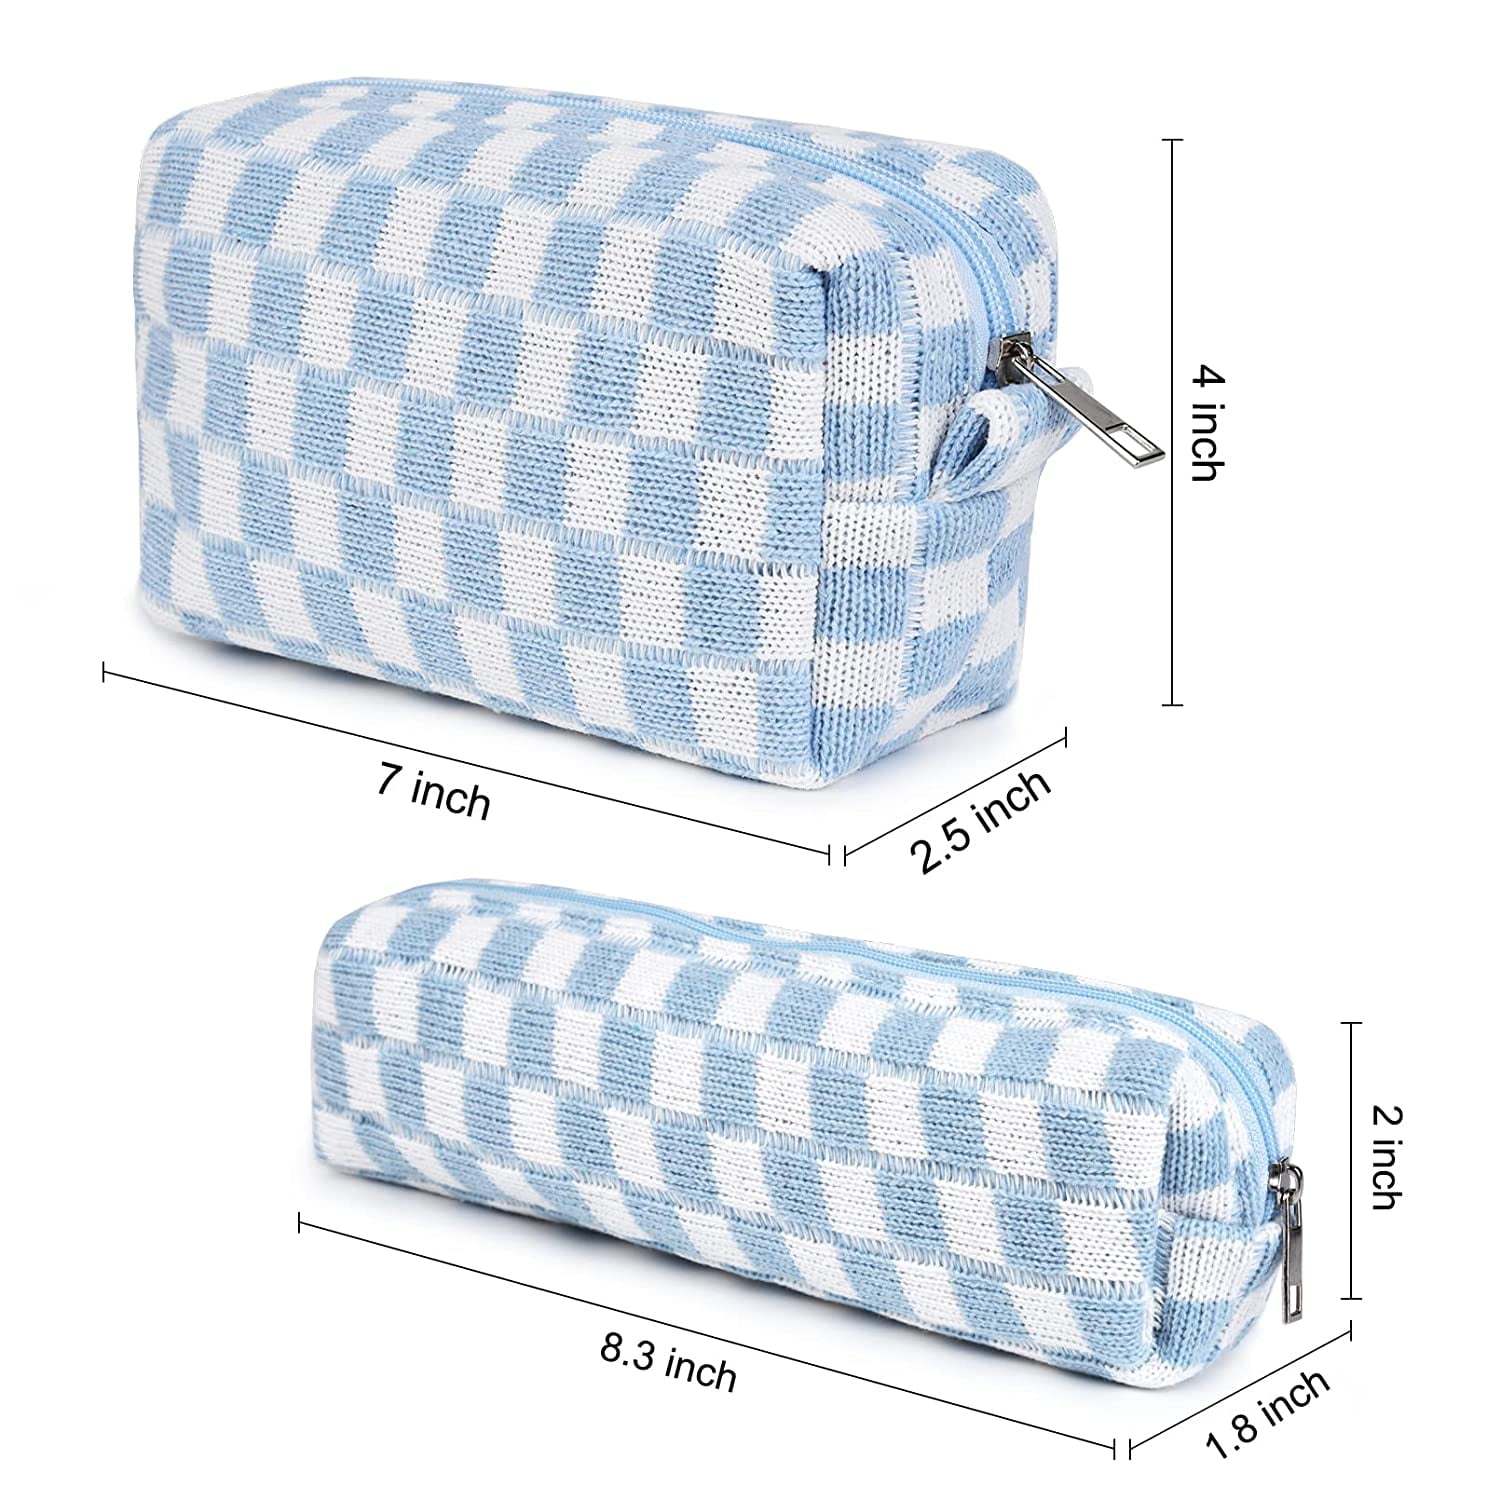  LOLDREAM Portable Checkered Makeup Bags,Large Capacity Travel Cosmetic  Bag,Large Open Lay Flat Makeup Bag Organizer,PU Leather Waterproof Toiletry  Bag : Beauty & Personal Care